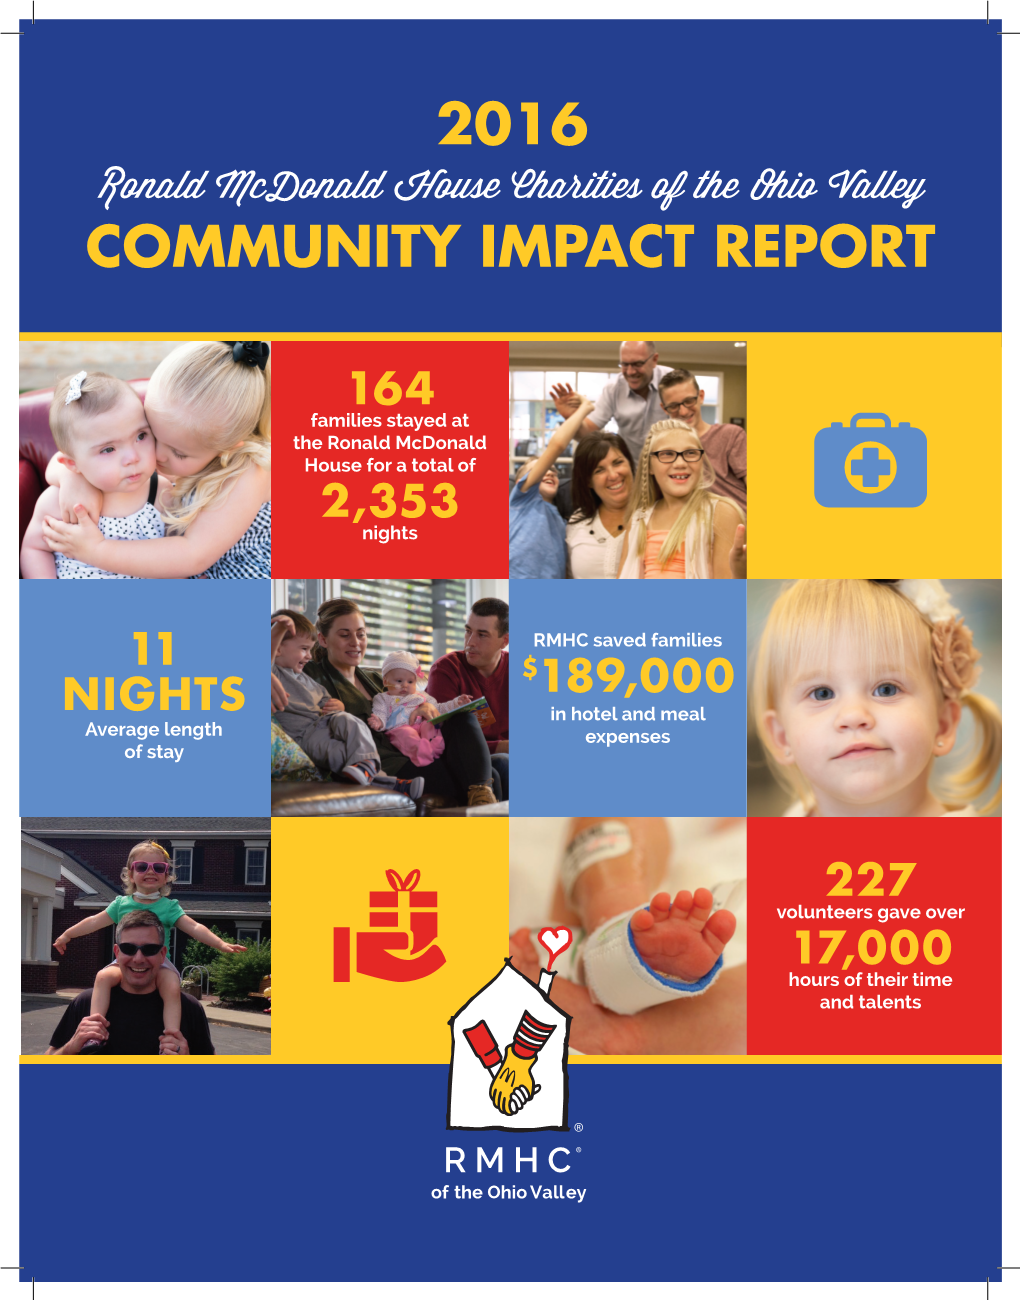 2016 Community Impact Report 5 “The Doctors at St